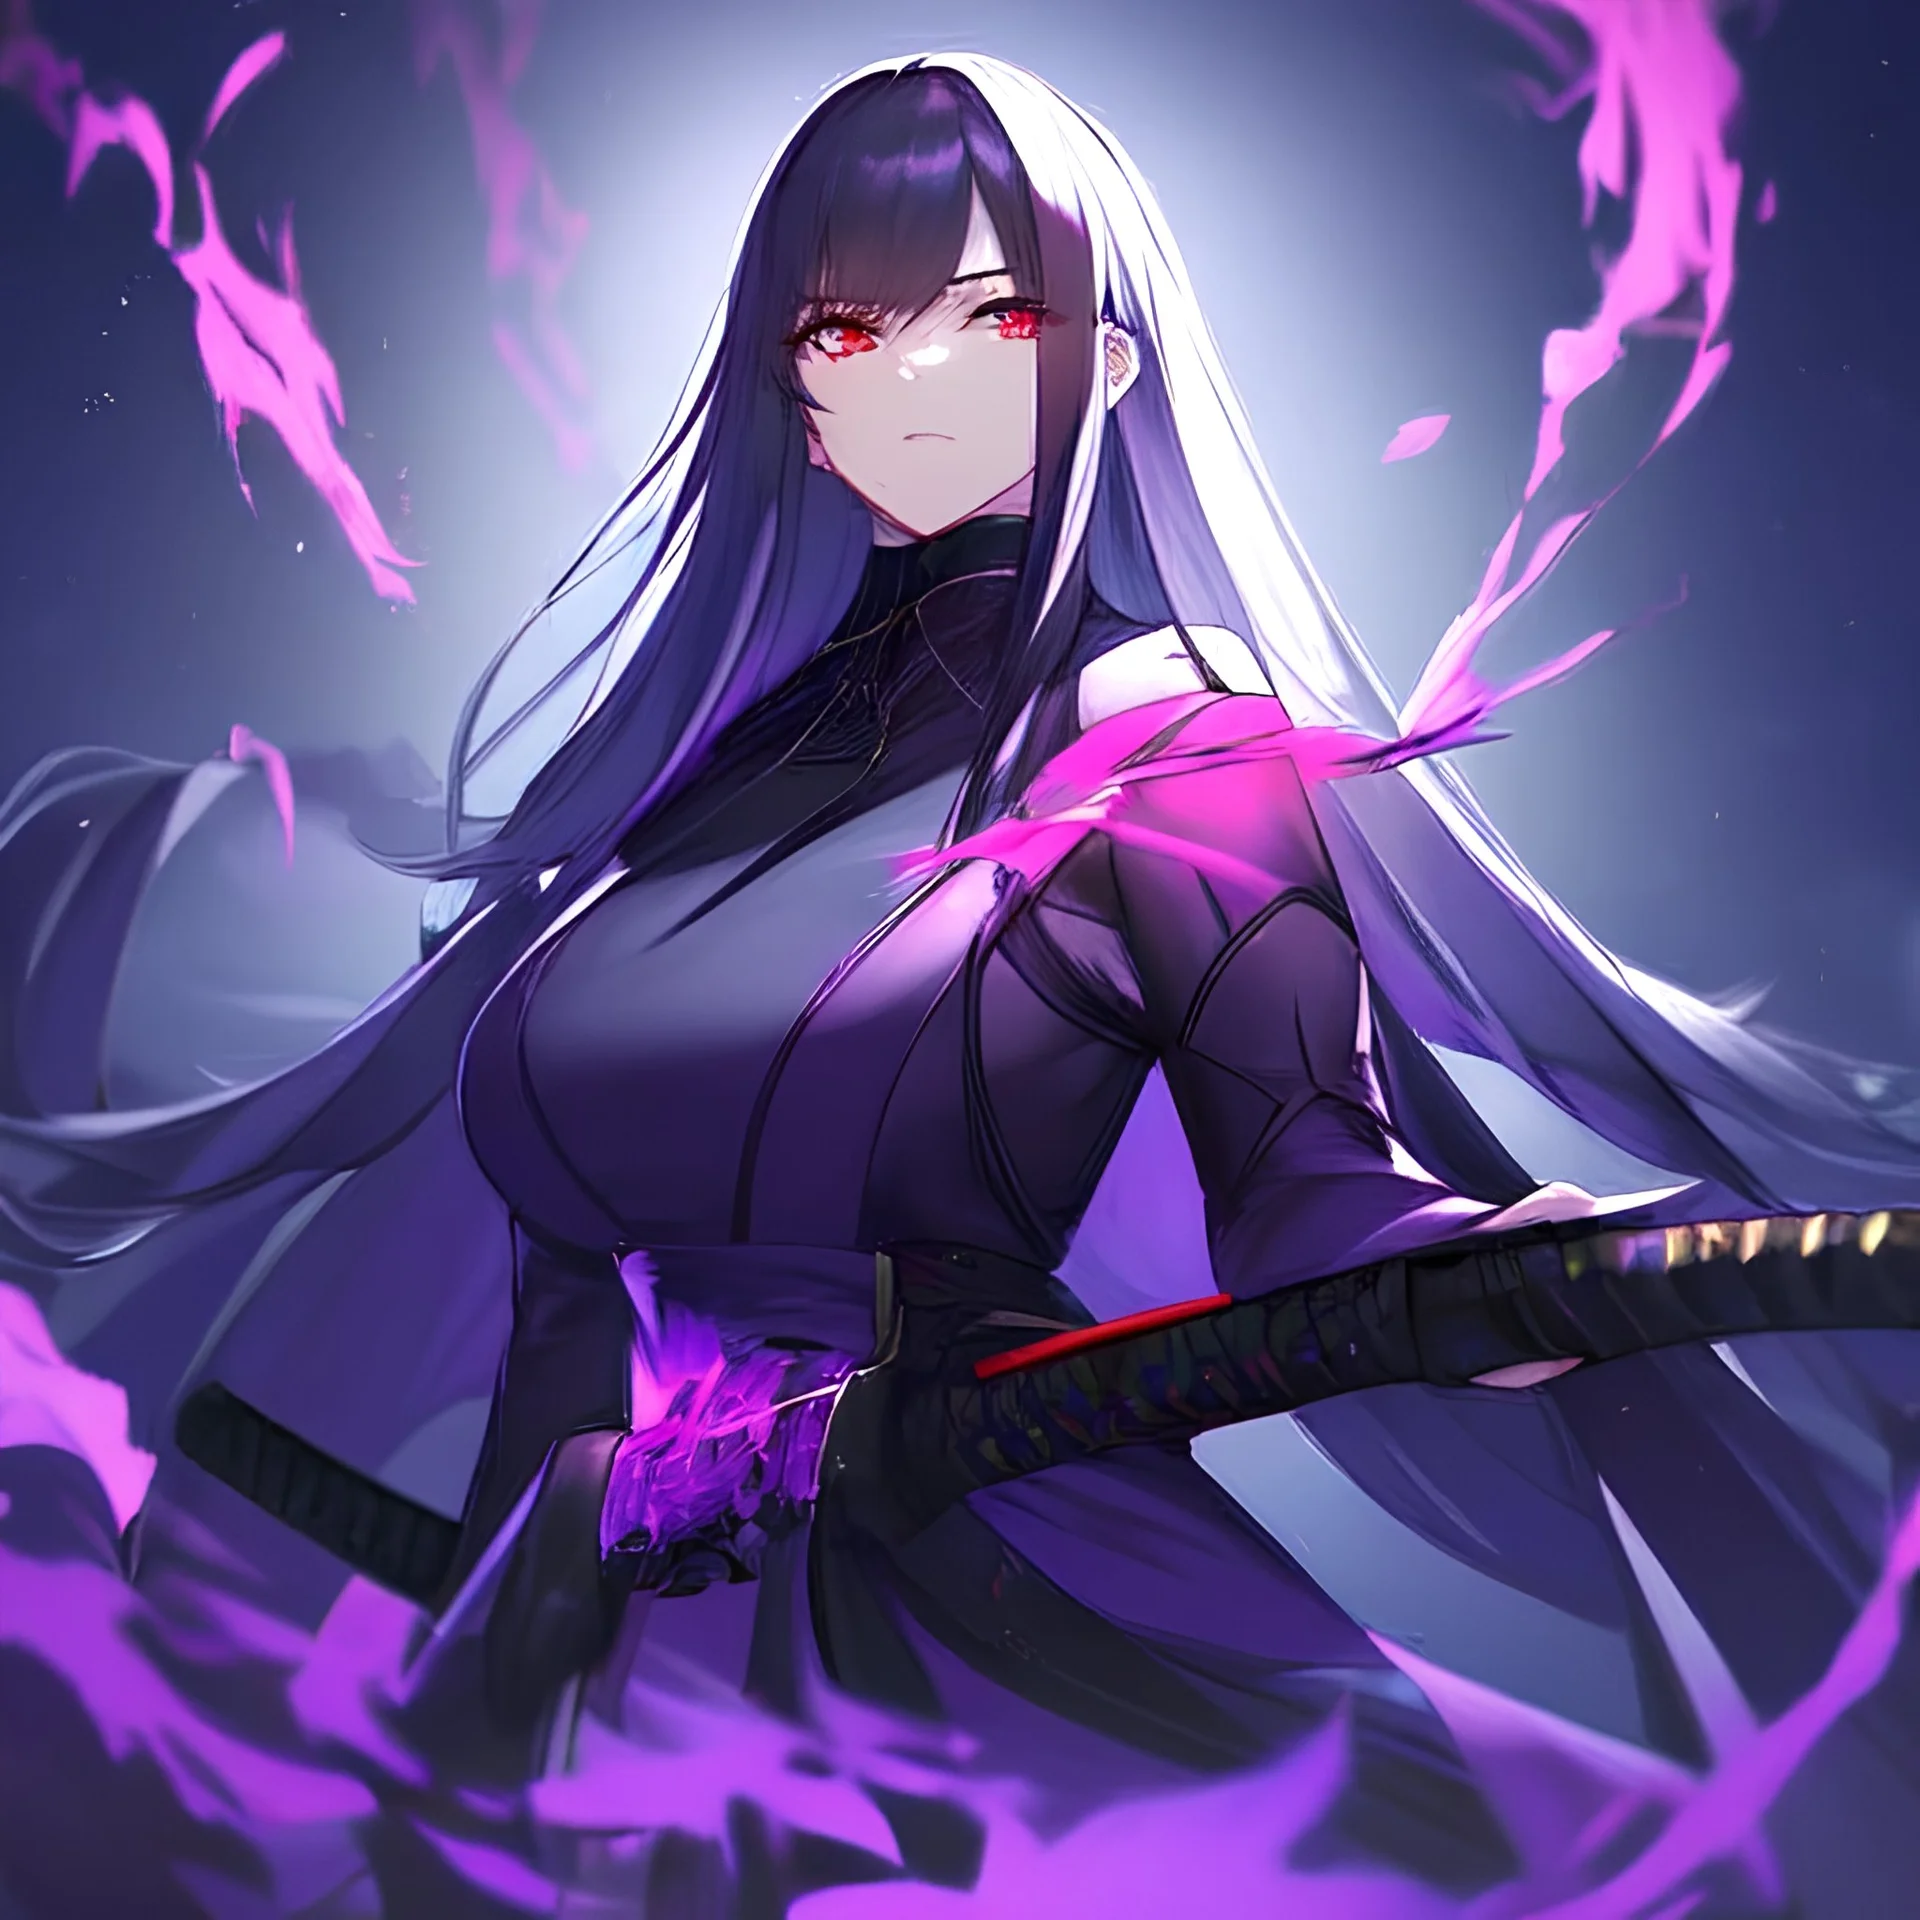 Clear Focus High resolution, black long hair, red eyes, holding glowing purple duel katanas, purple lighting in background, black and purple warrior outfit, serious face expression.